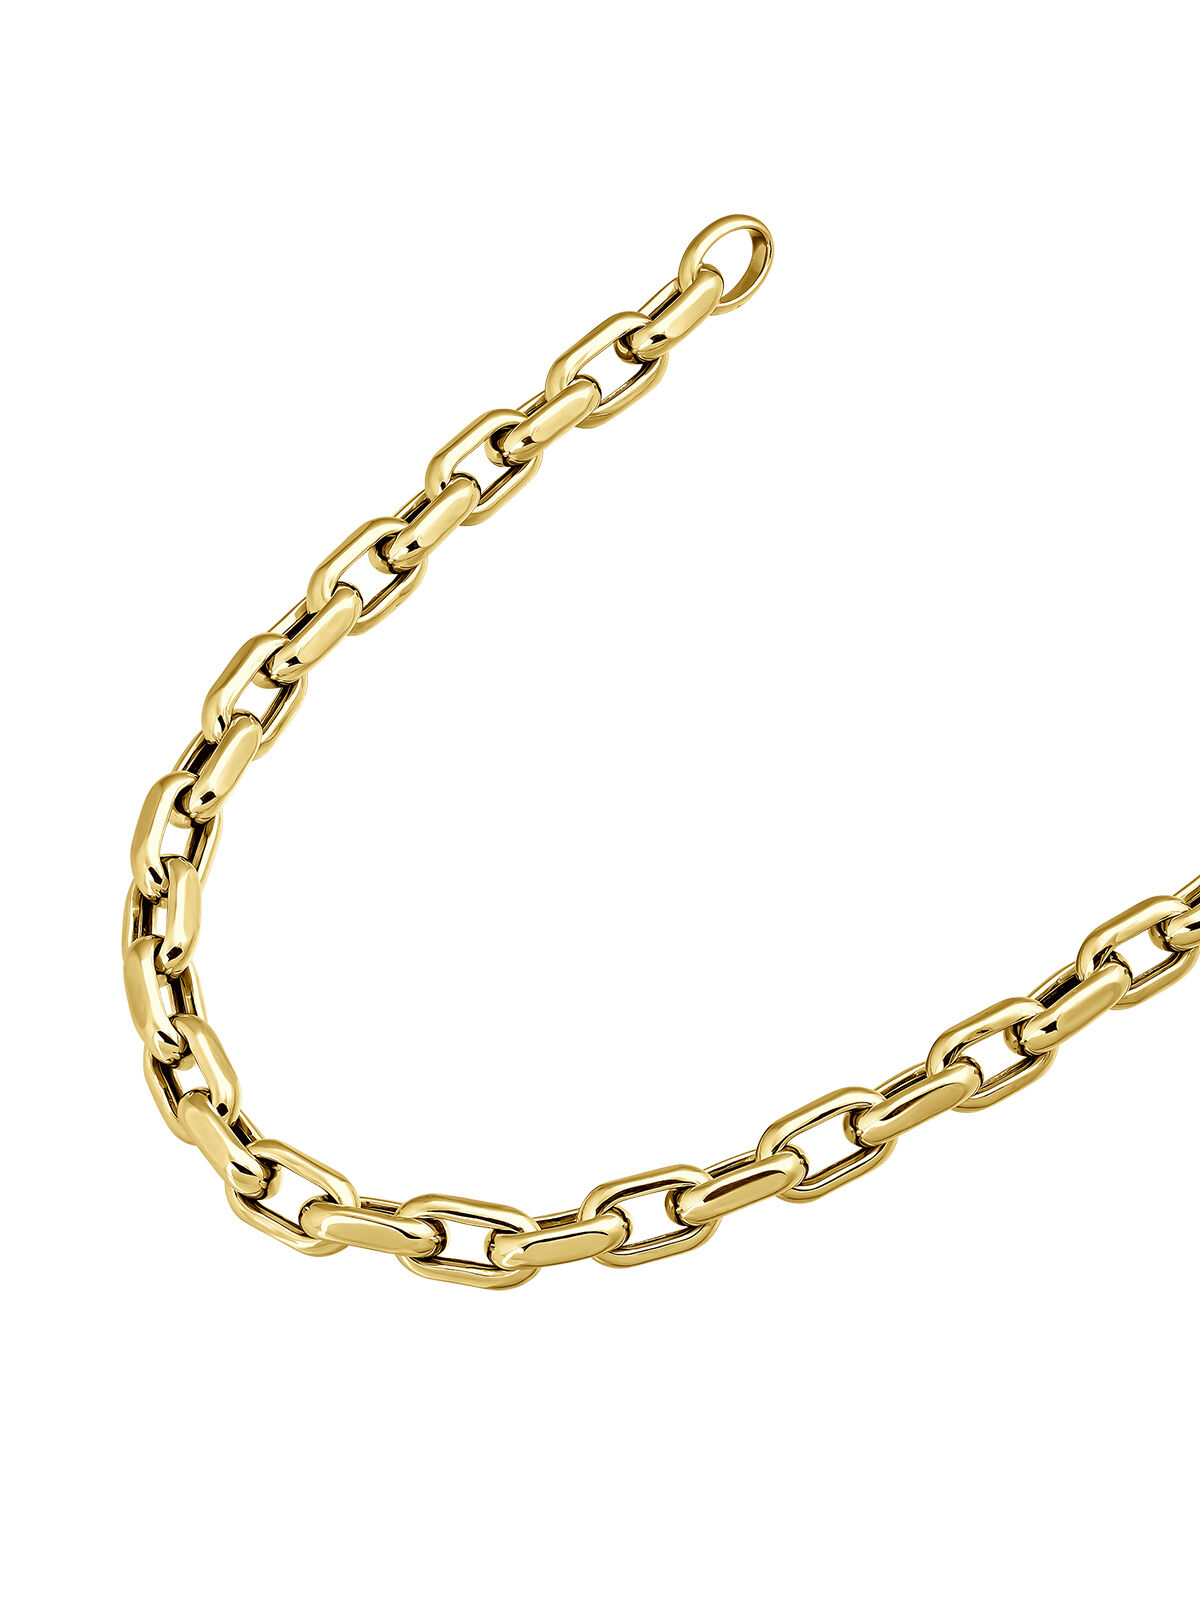 Yellow and White Gold Spiral Tubular 45cm Necklace